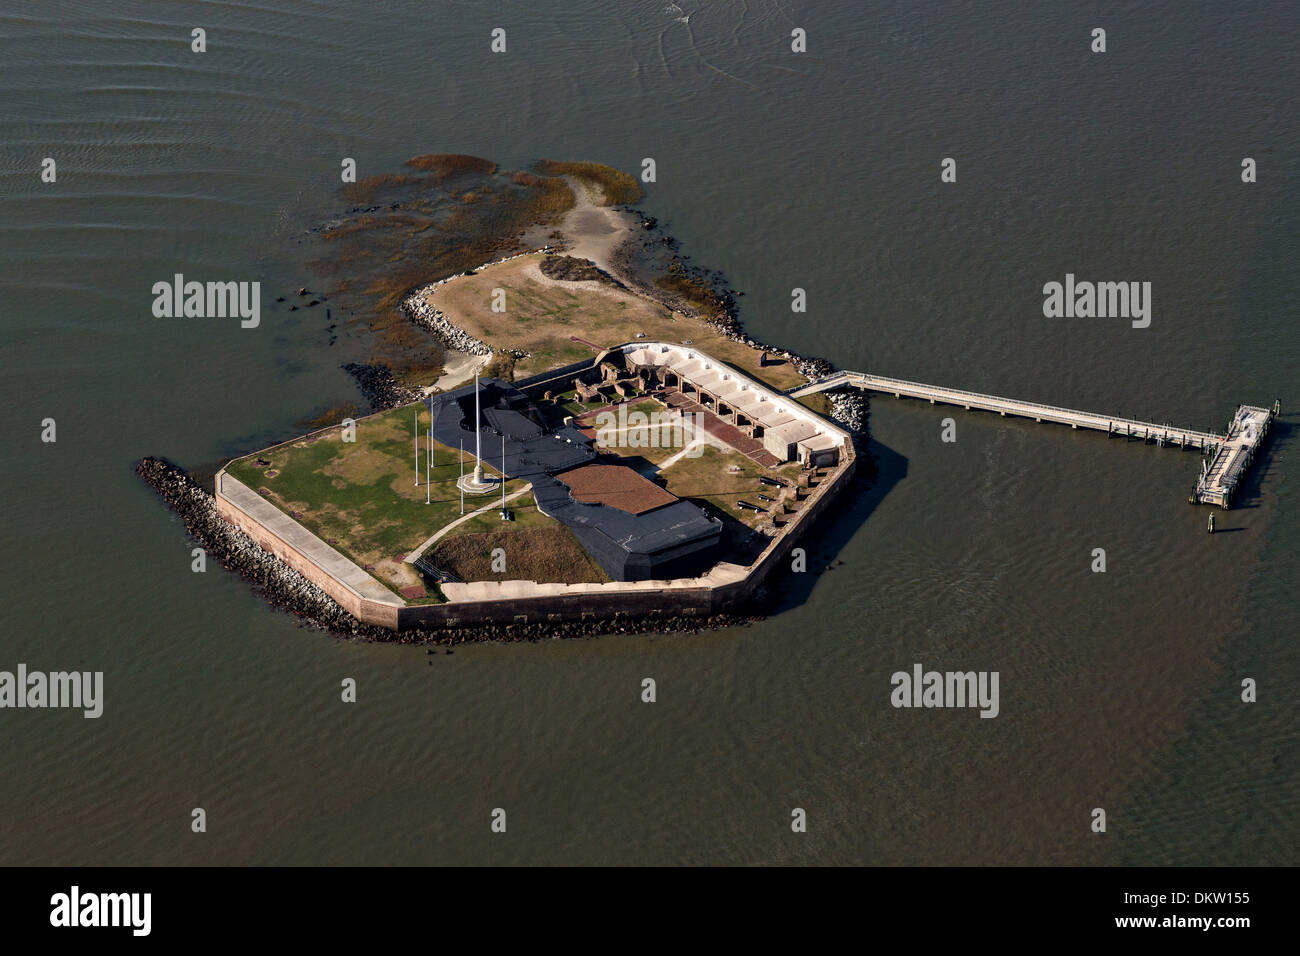 Aerial View Of Fort Sumter National Monument Site Where The Civil War